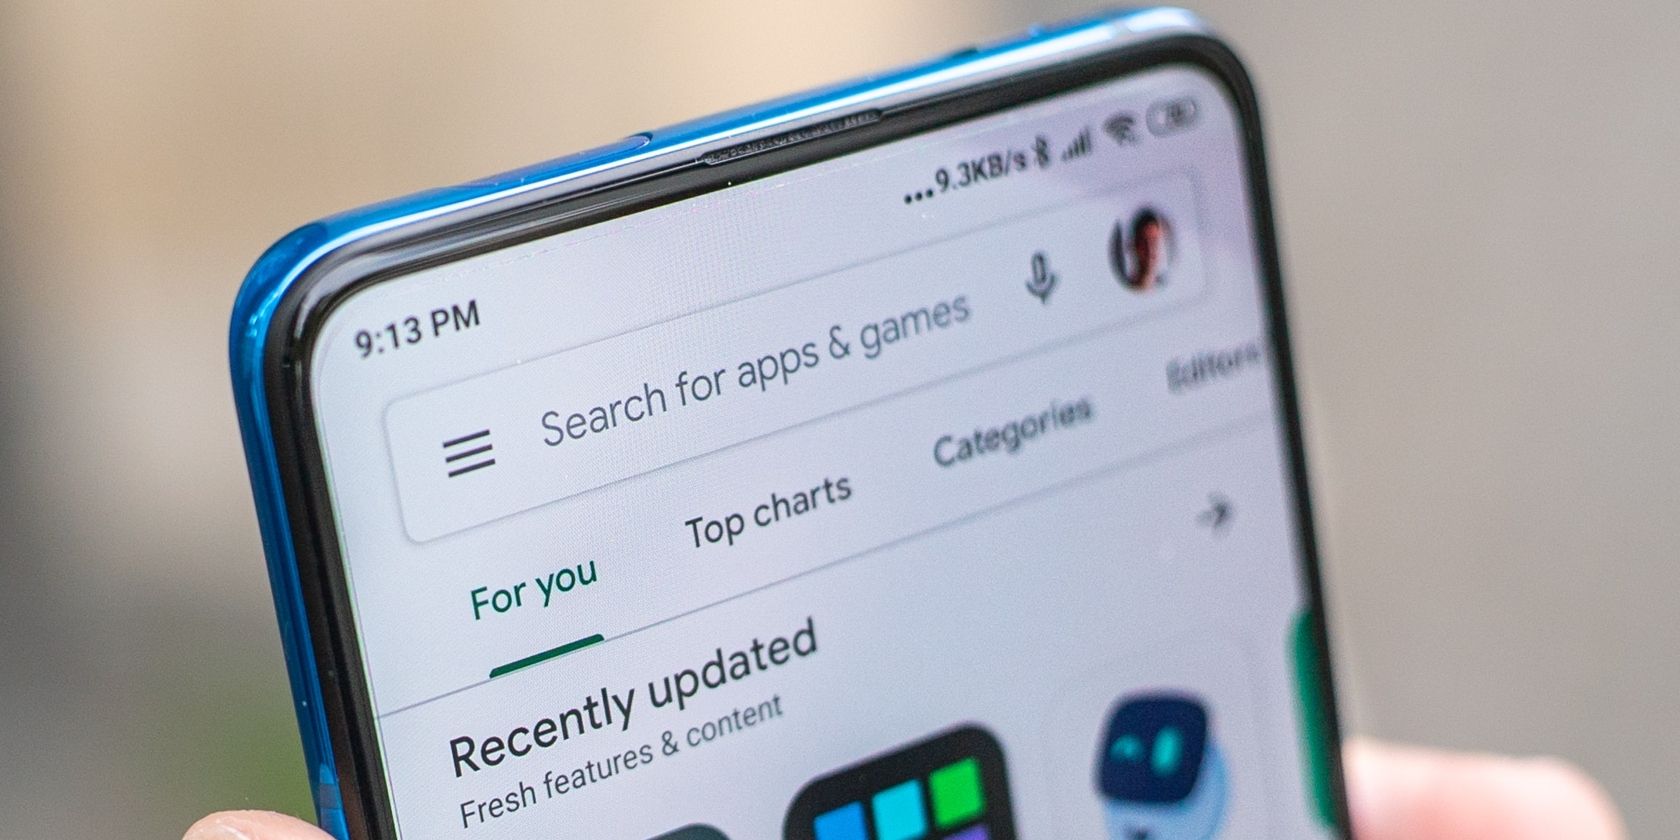 Even Top-Ranked Android Apps in Google Play Store Provide Misleading Data  Safety Labels